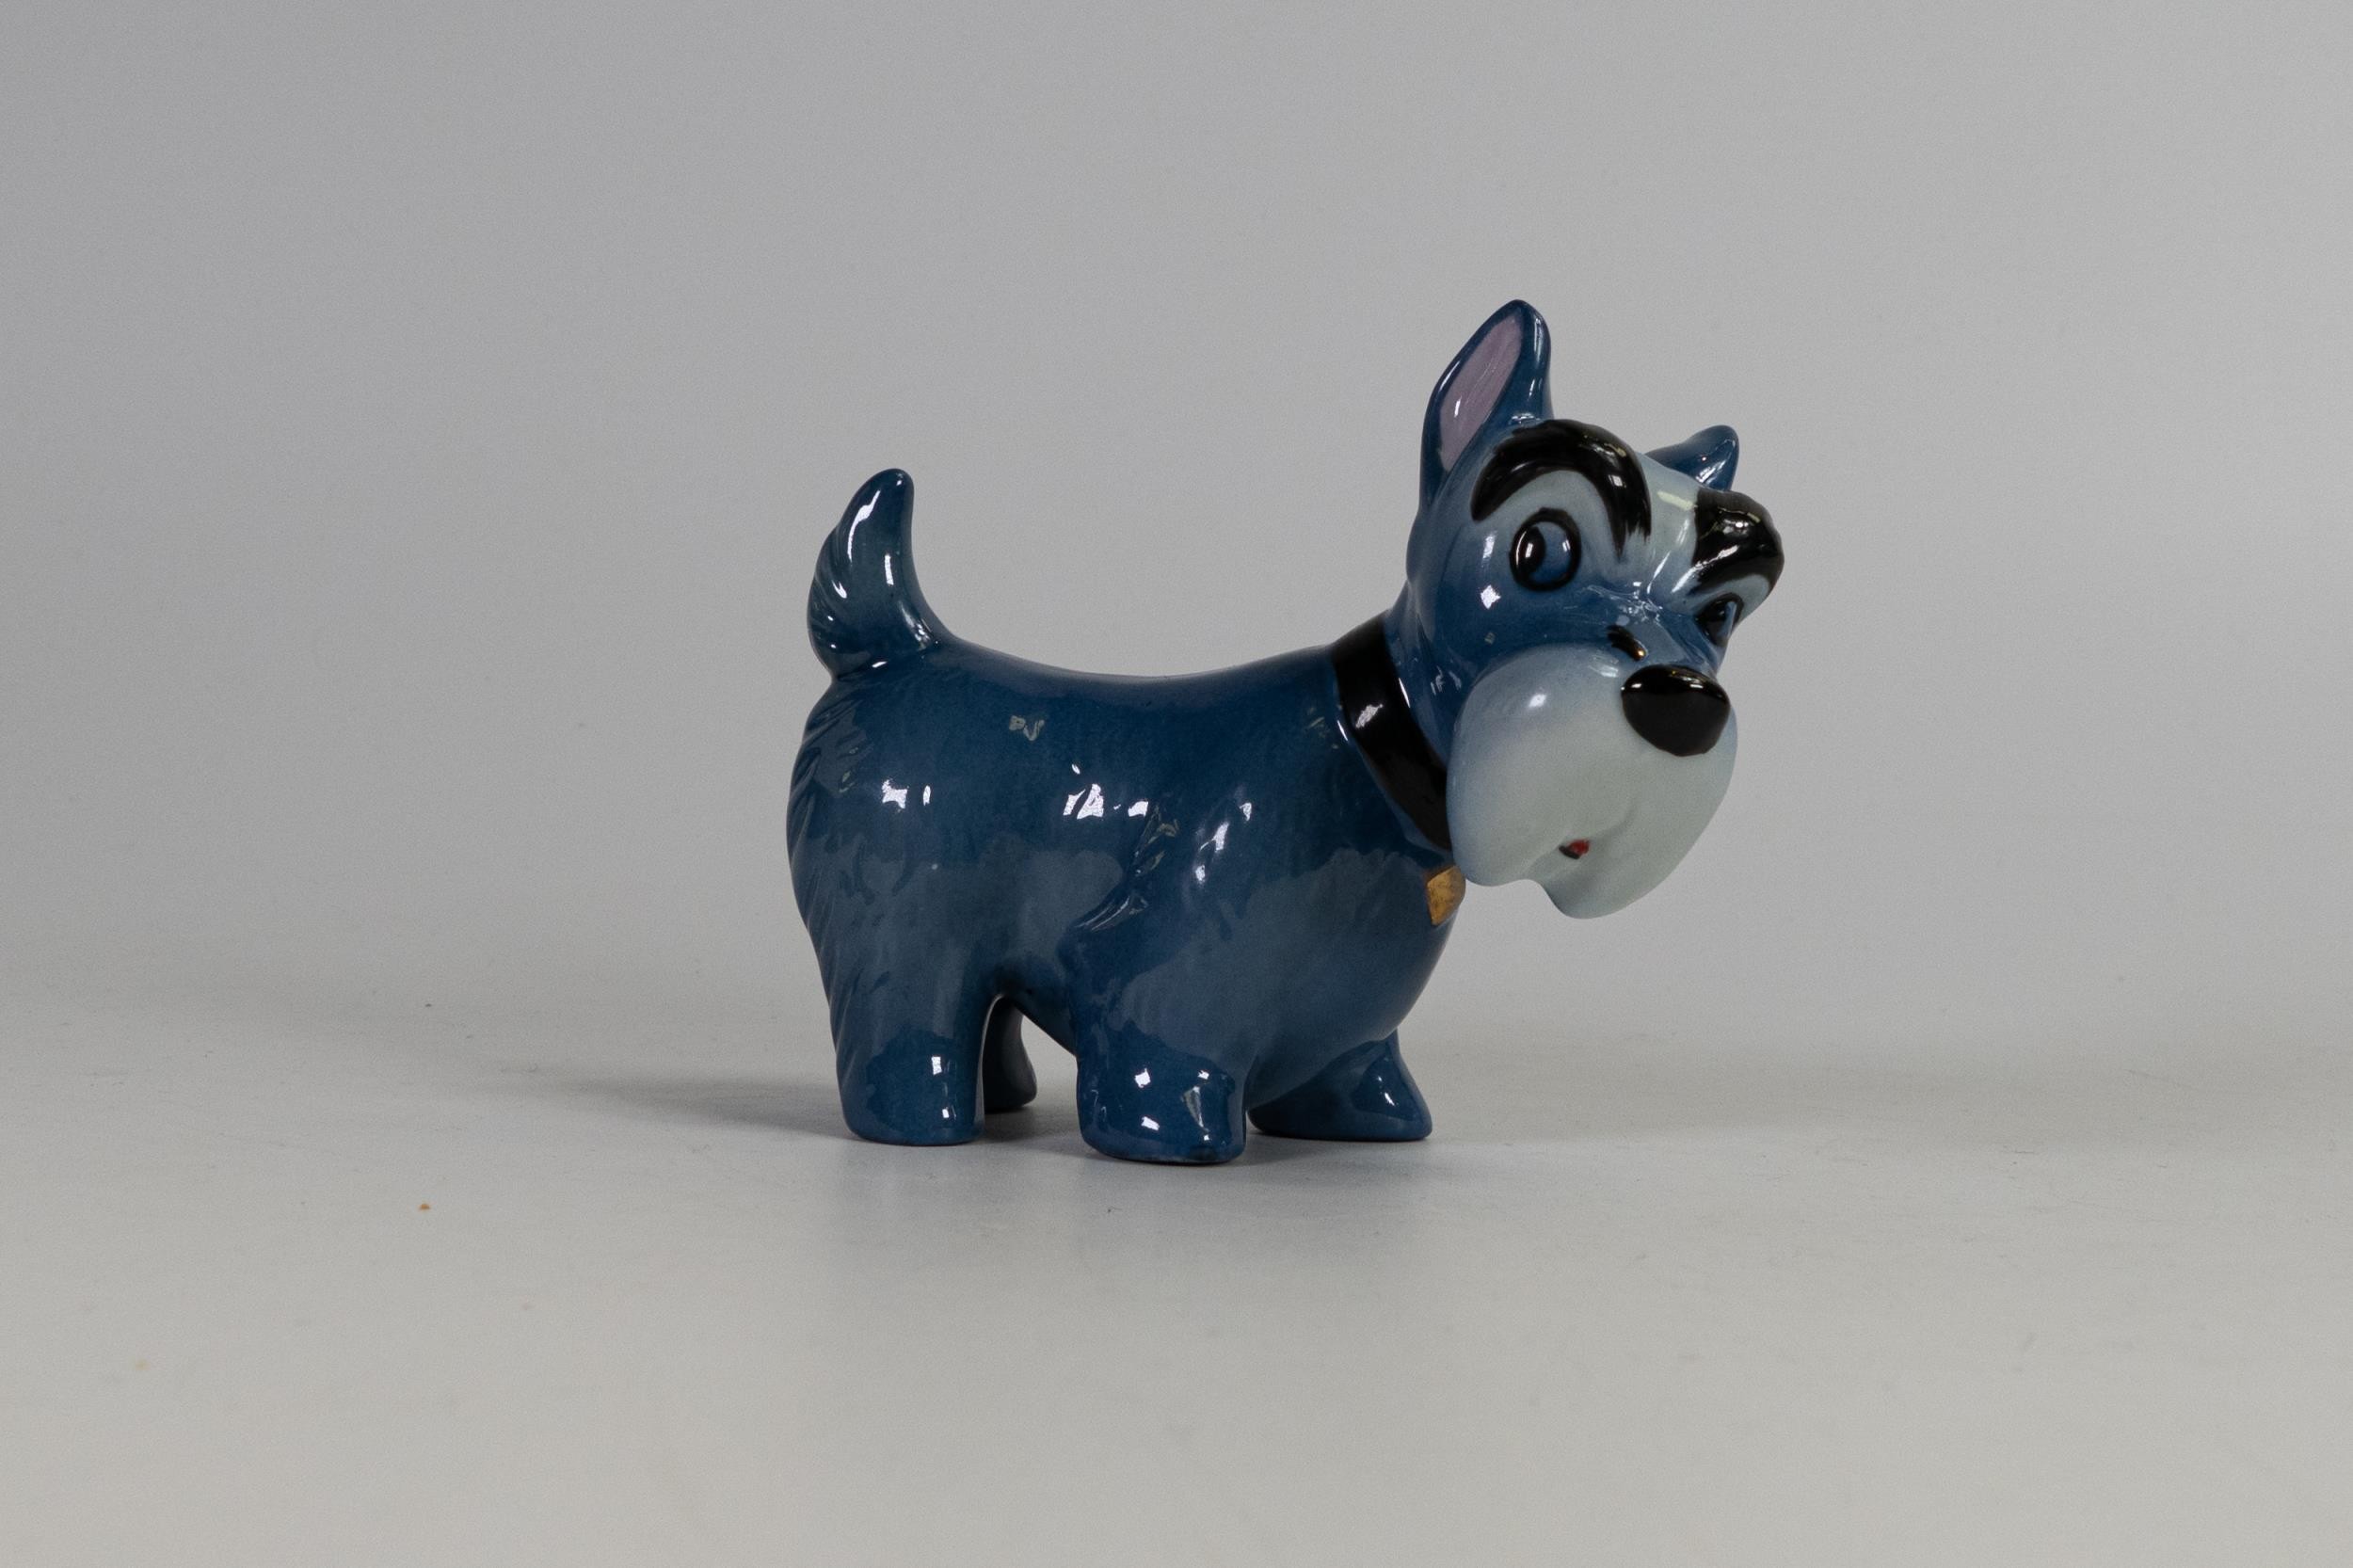 Wade unmarked colourway prototype from the Lady & the Tramp series, Blow Up figure of Jock